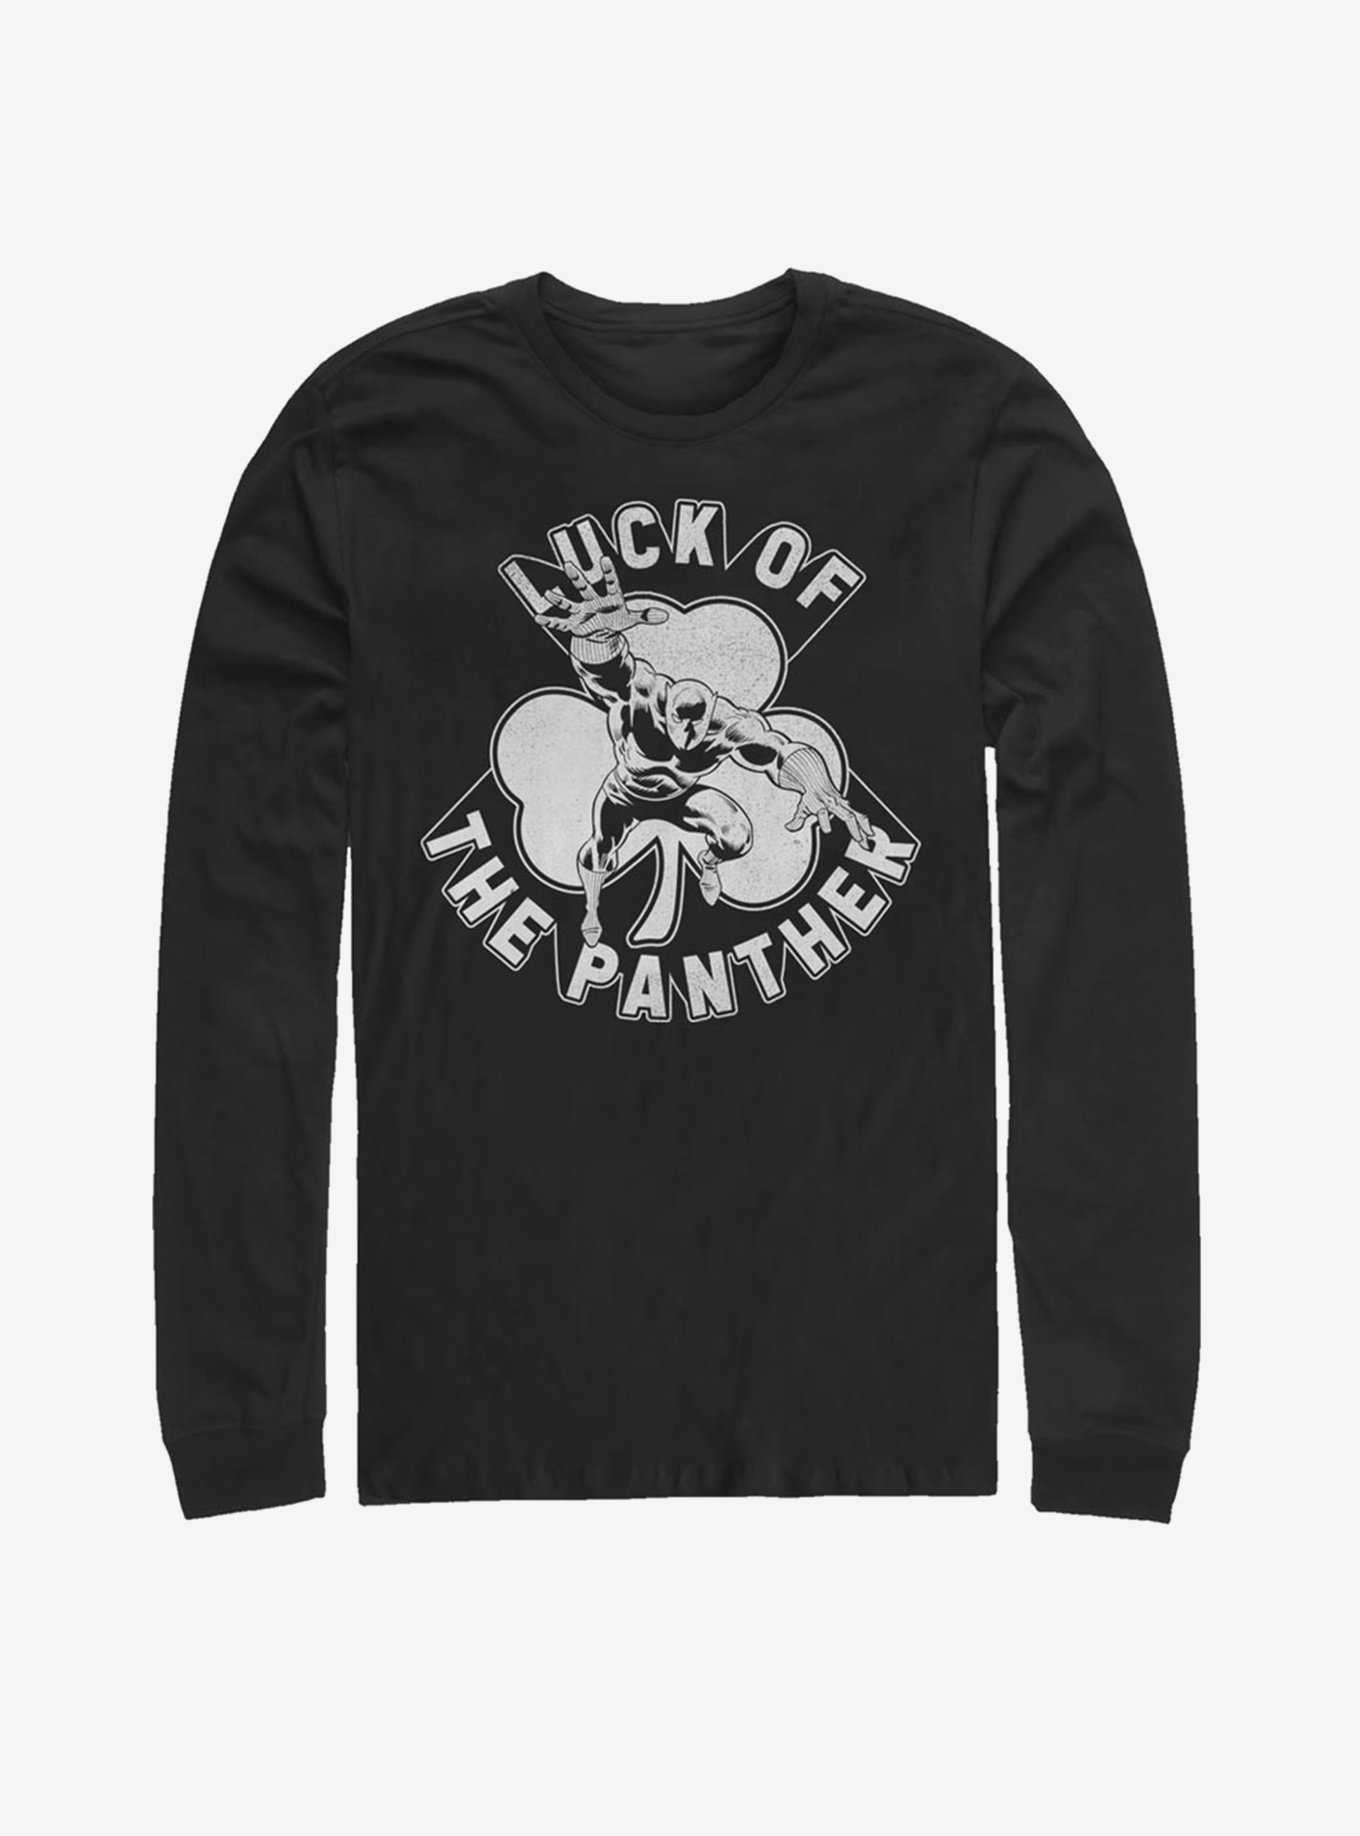 Marvel Black Panther Luck Of The Panther Long-Sleeve T-Shirt, , hi-res